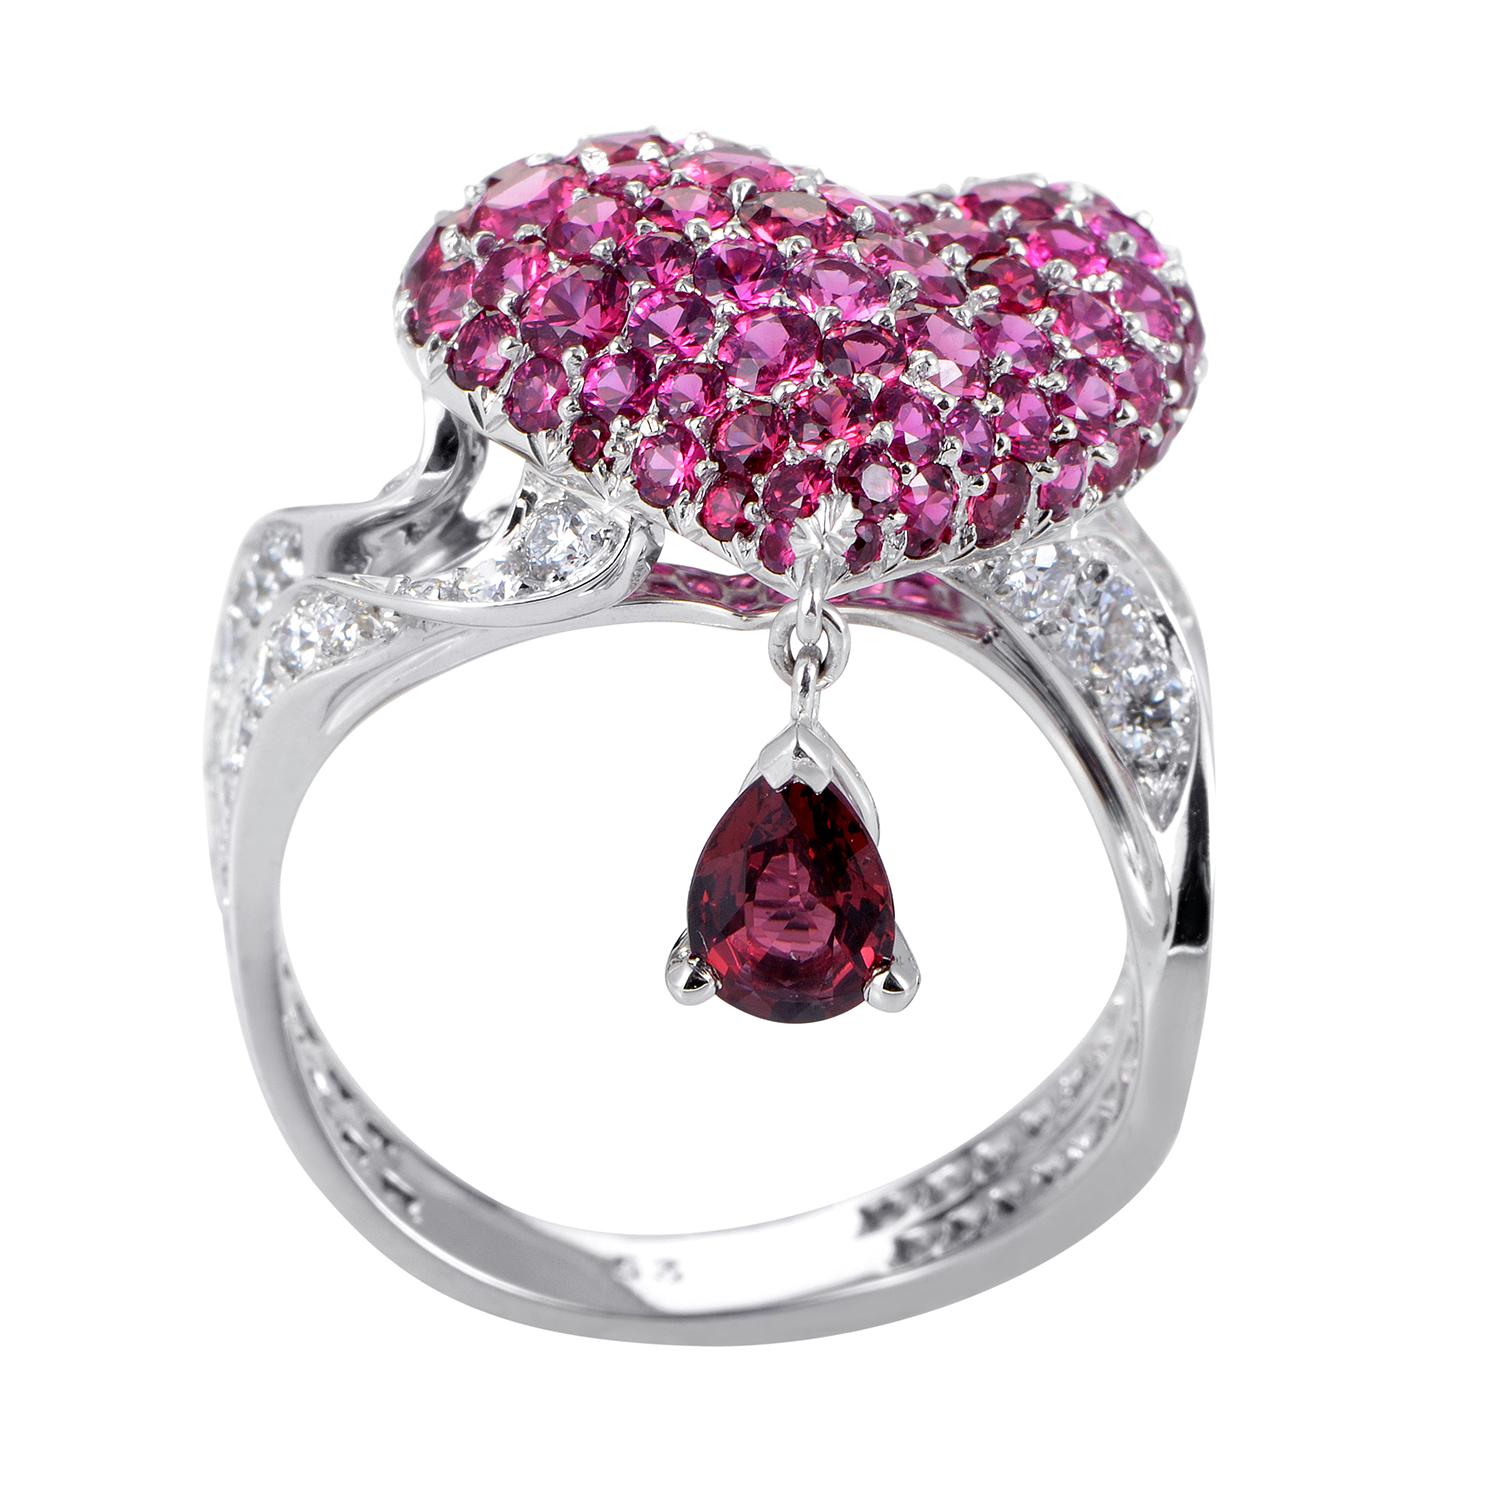 Gracefully entwined and embellished with glistening diamonds totaling 0.90ct, the wonderful body of this stunning 18K white gold ring from Dior leads up to the majestic heart motif adorned lavishly with precious rubies spinel <br />Ring Top